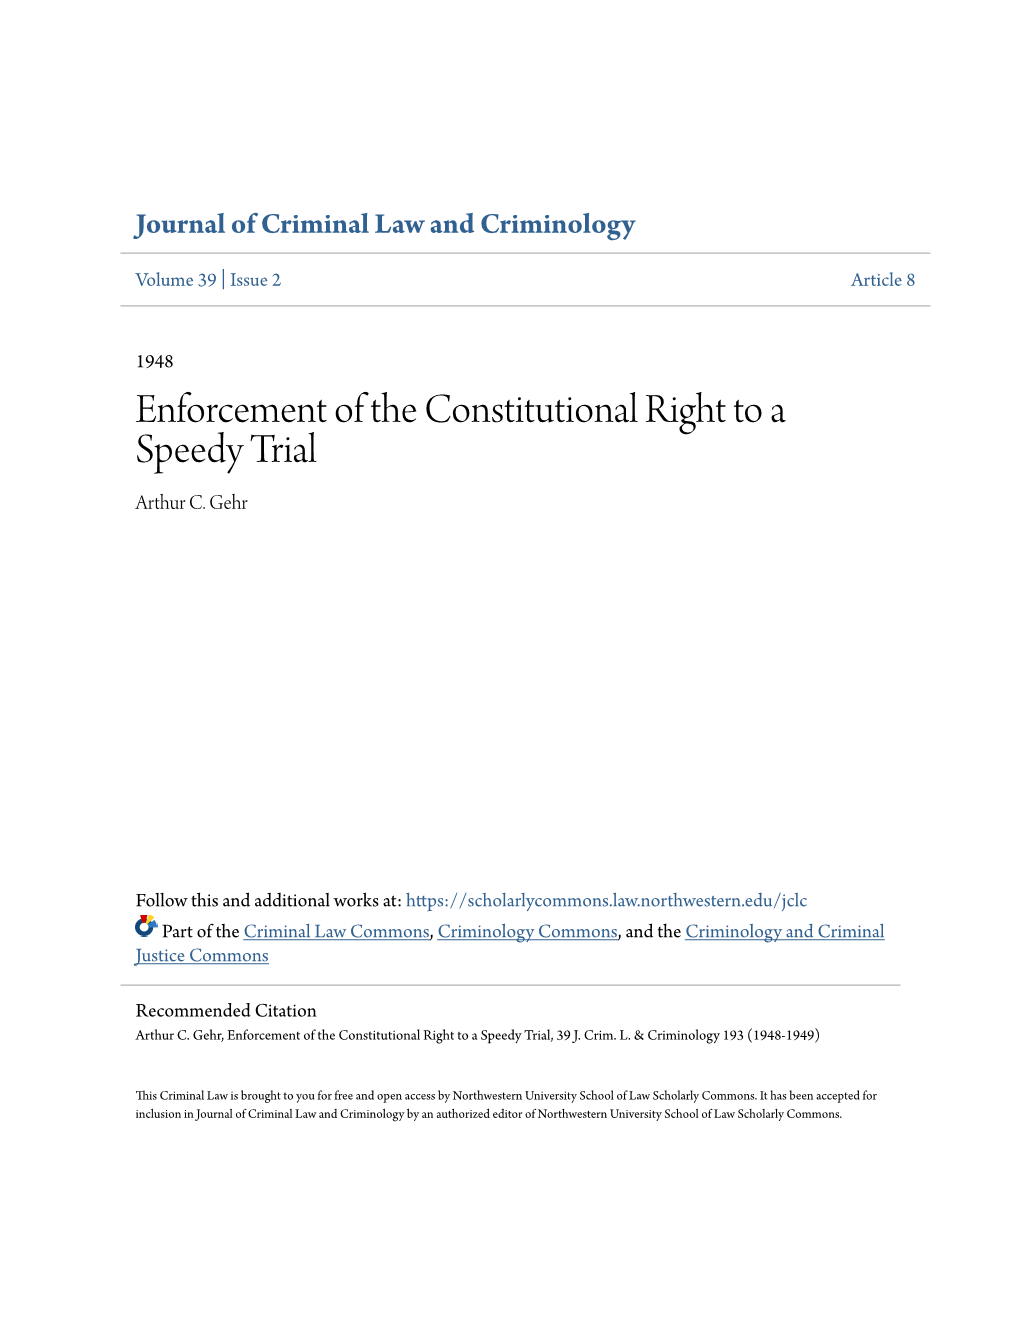 Enforcement of the Constitutional Right to a Speedy Trial Arthur C